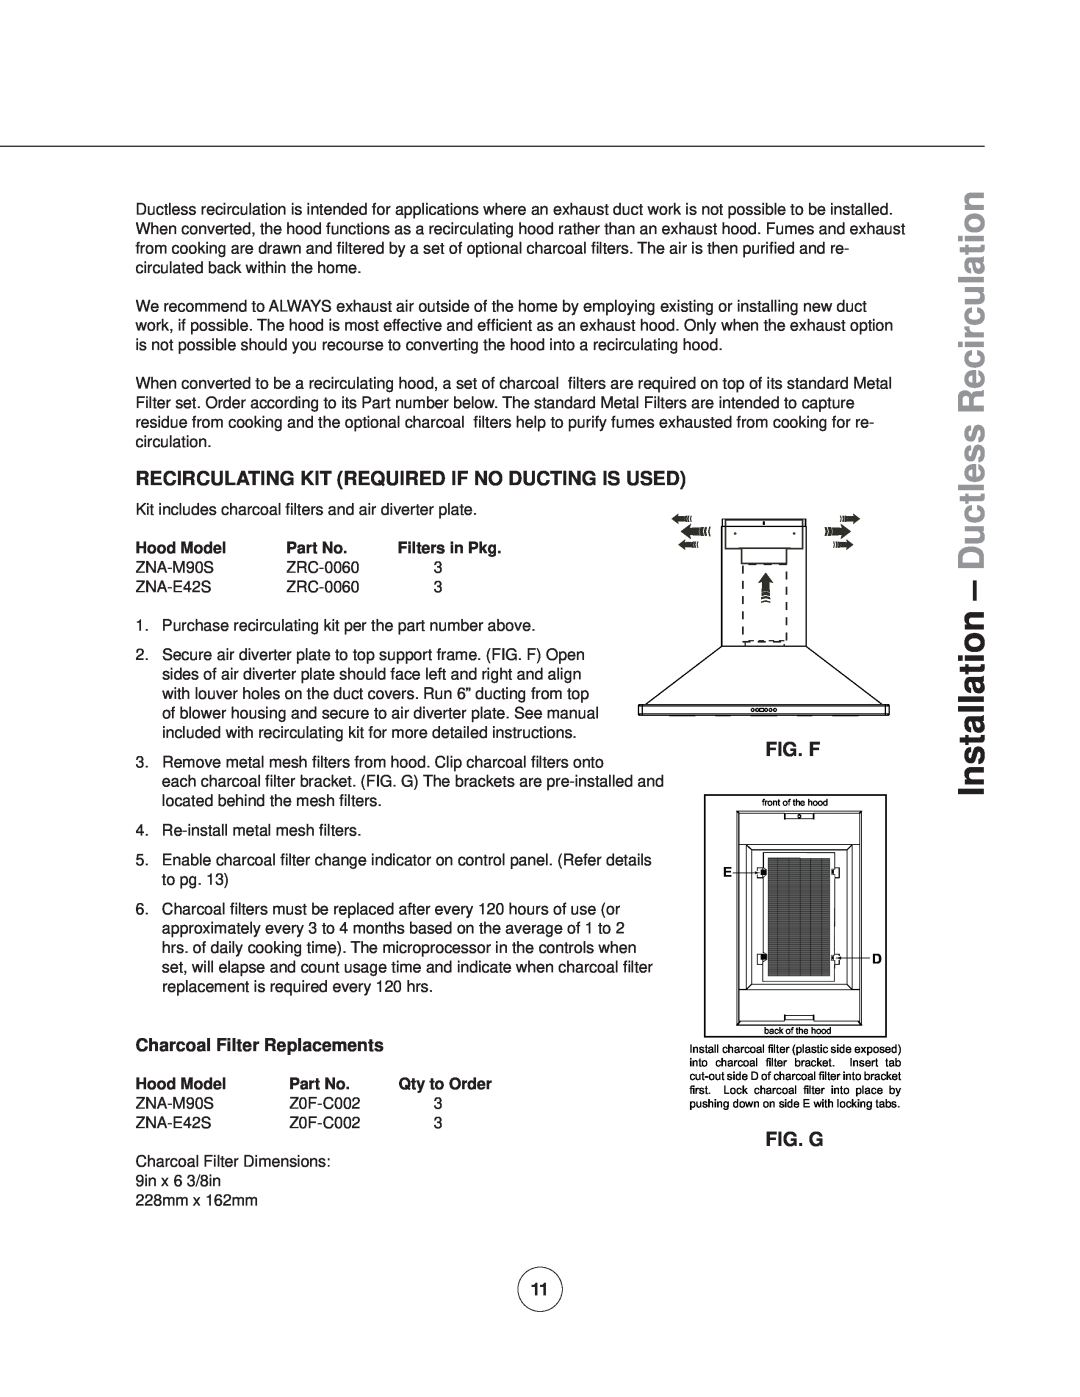 Zephyr ZNA-M90S Ductless Recirculation, Installation, Recirculating Kit Required If No Ducting Is Used, Fig. F, Fig. G 